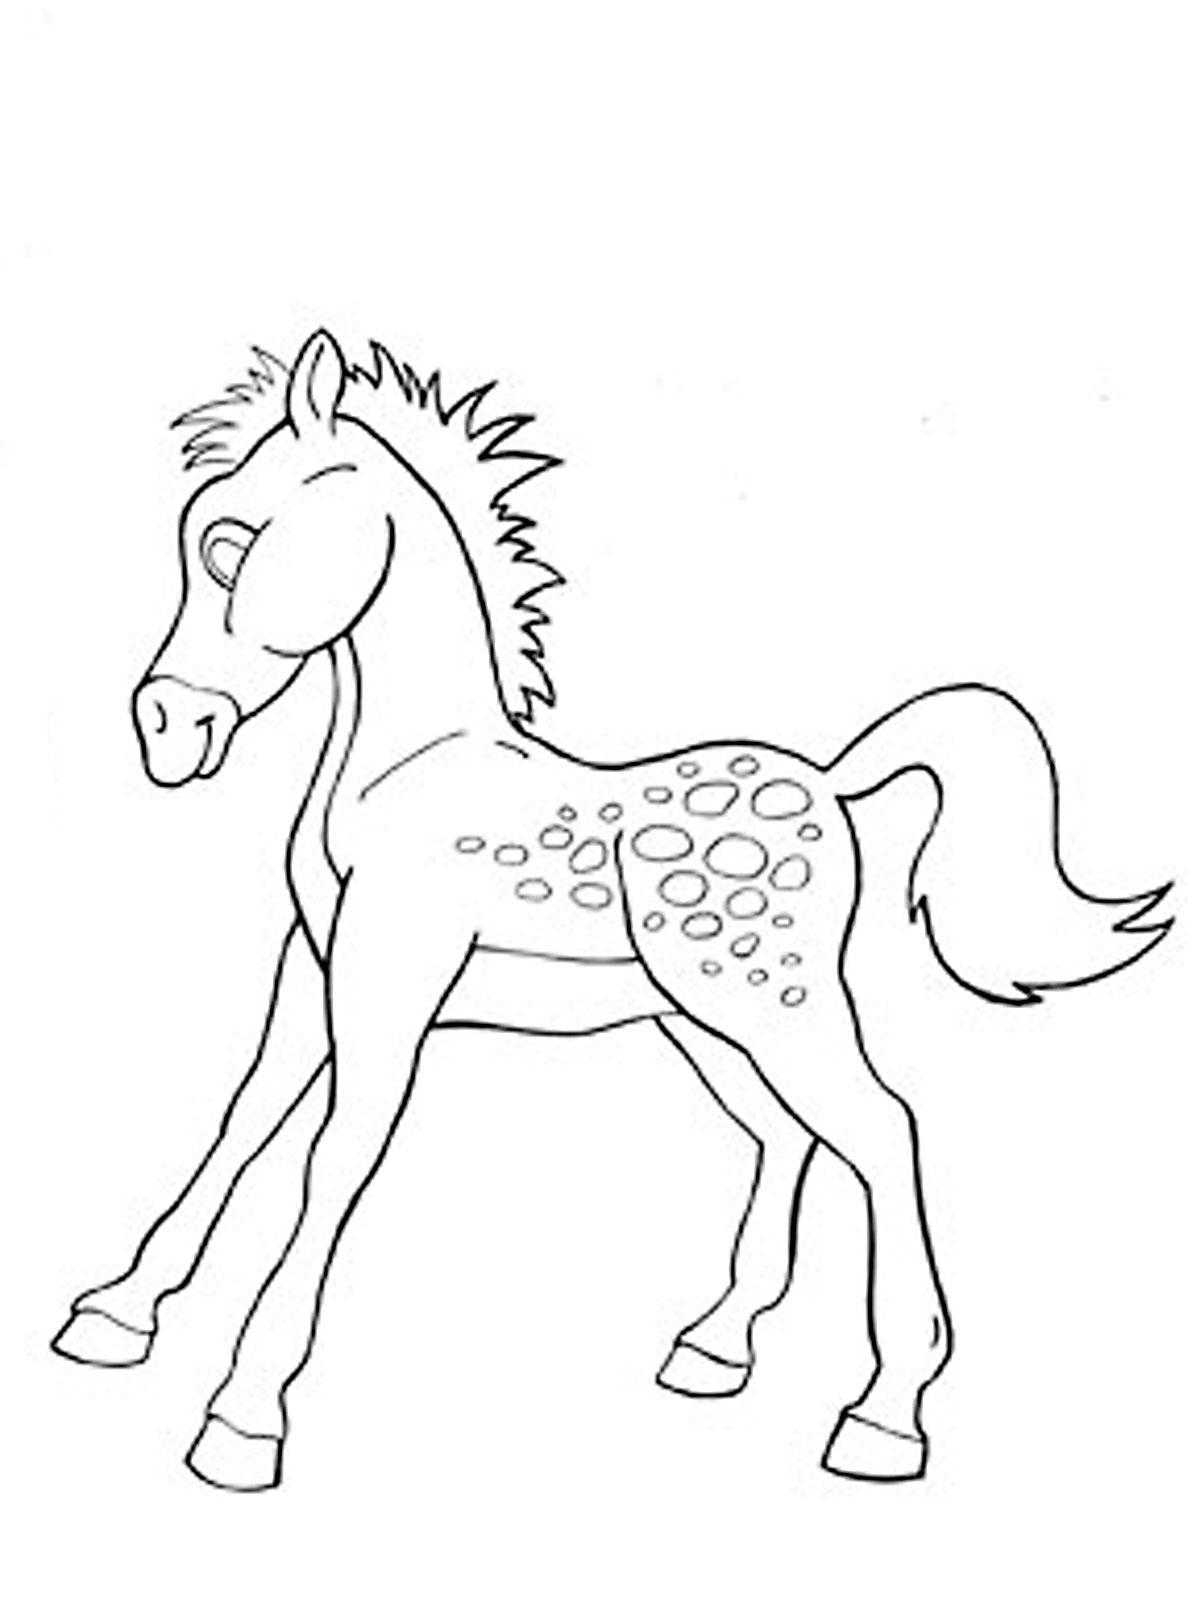 Great colt coloring for kids